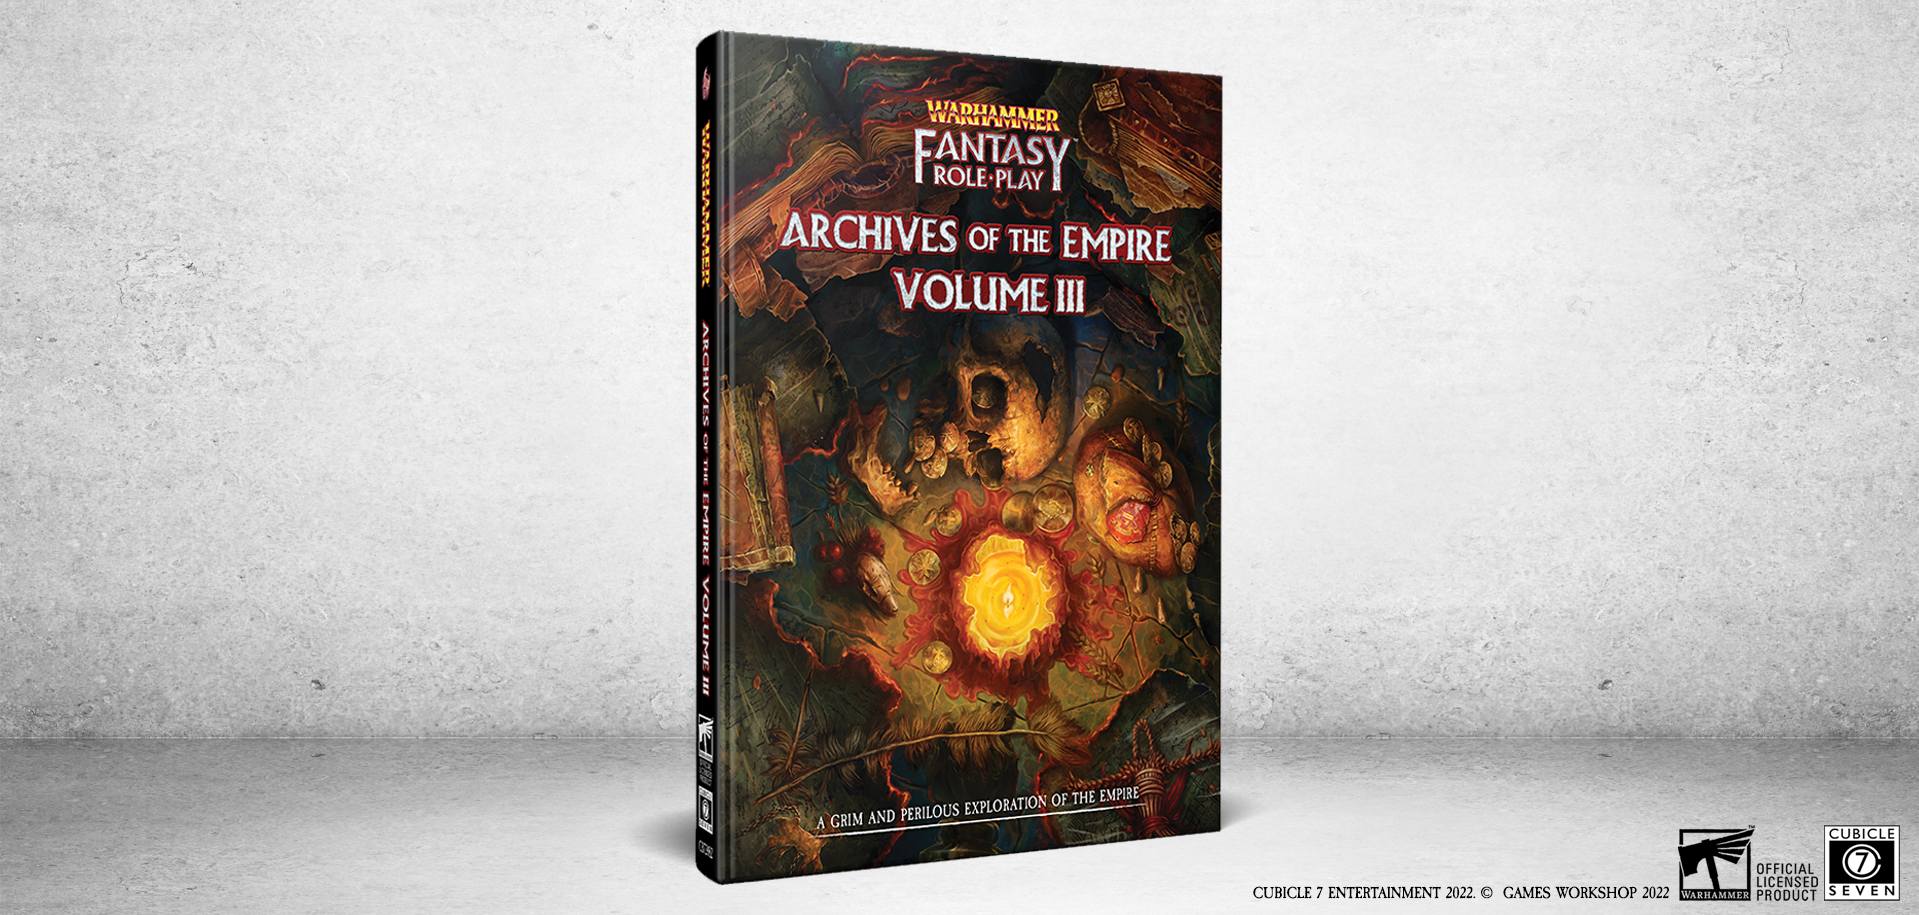 Warhammer Fantasy Roleplay: Archives of the Empire, Volume 3 is out now!